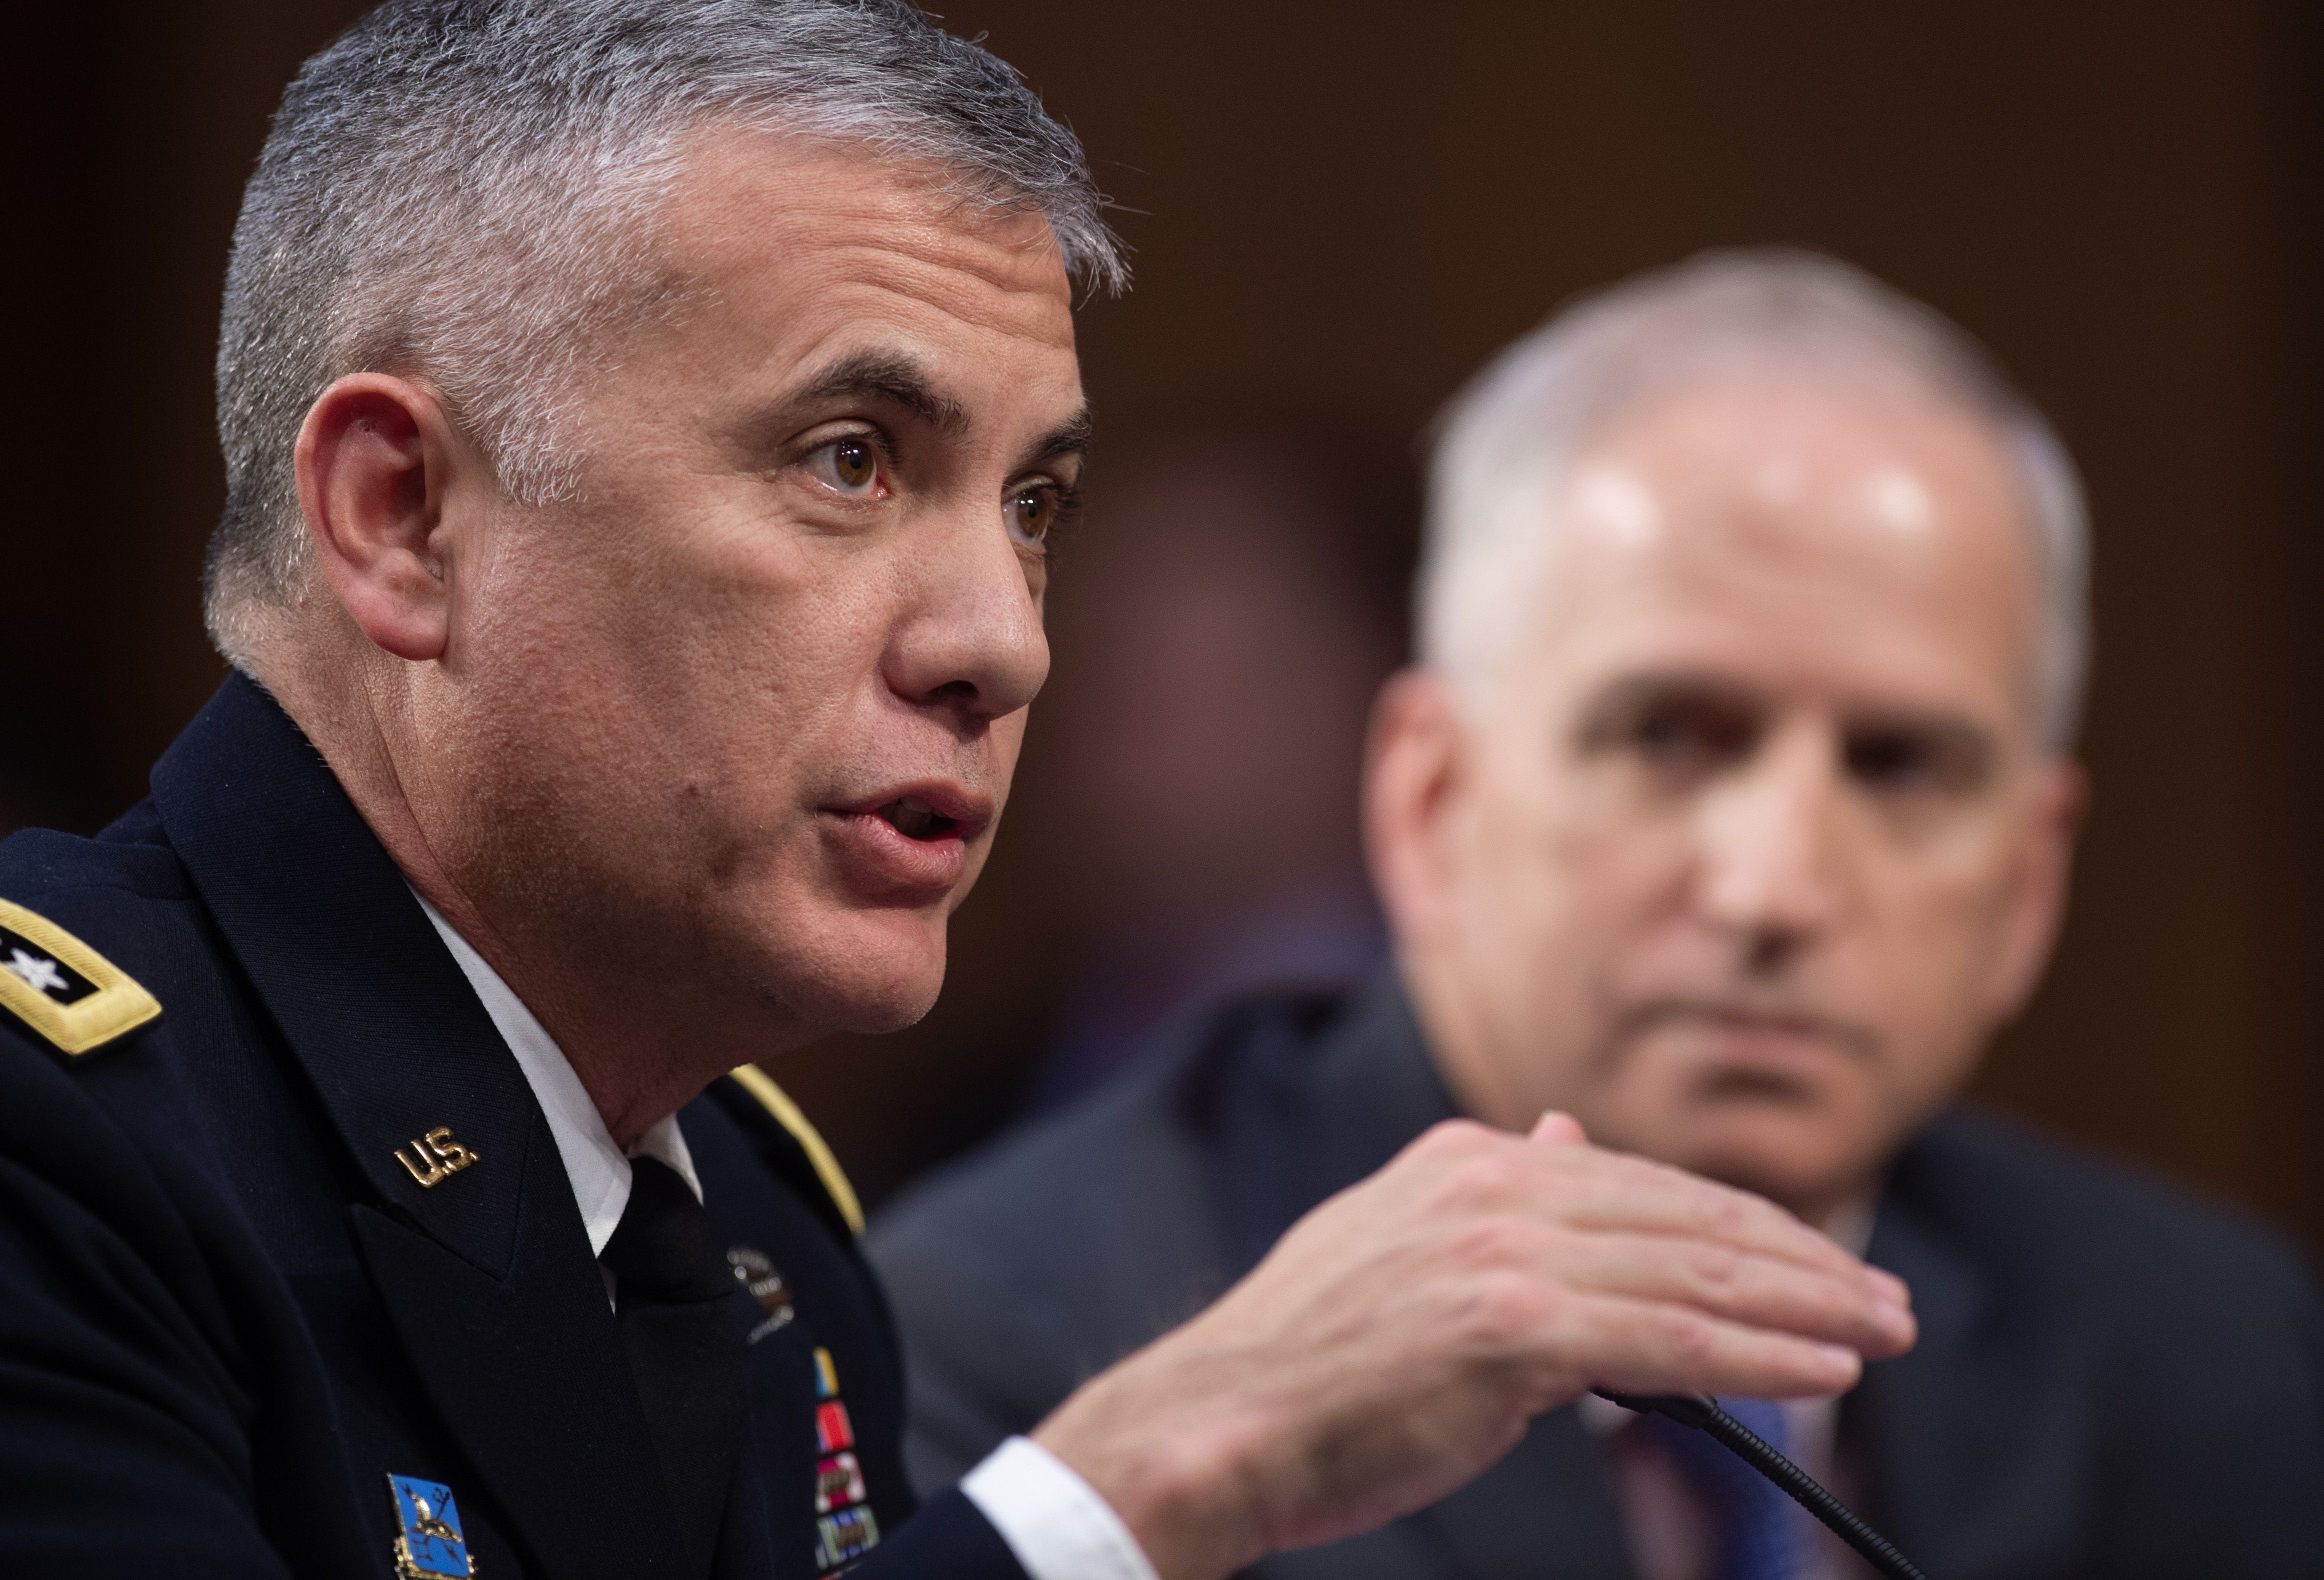 General Paul Nakasone (L), director of the National Security Agency, and Robert Cardillo (R), director of the National Geospatial-Intelligence Agency, testify on Worldwide Threats (SAUL LOEB/AFP/Getty Images)